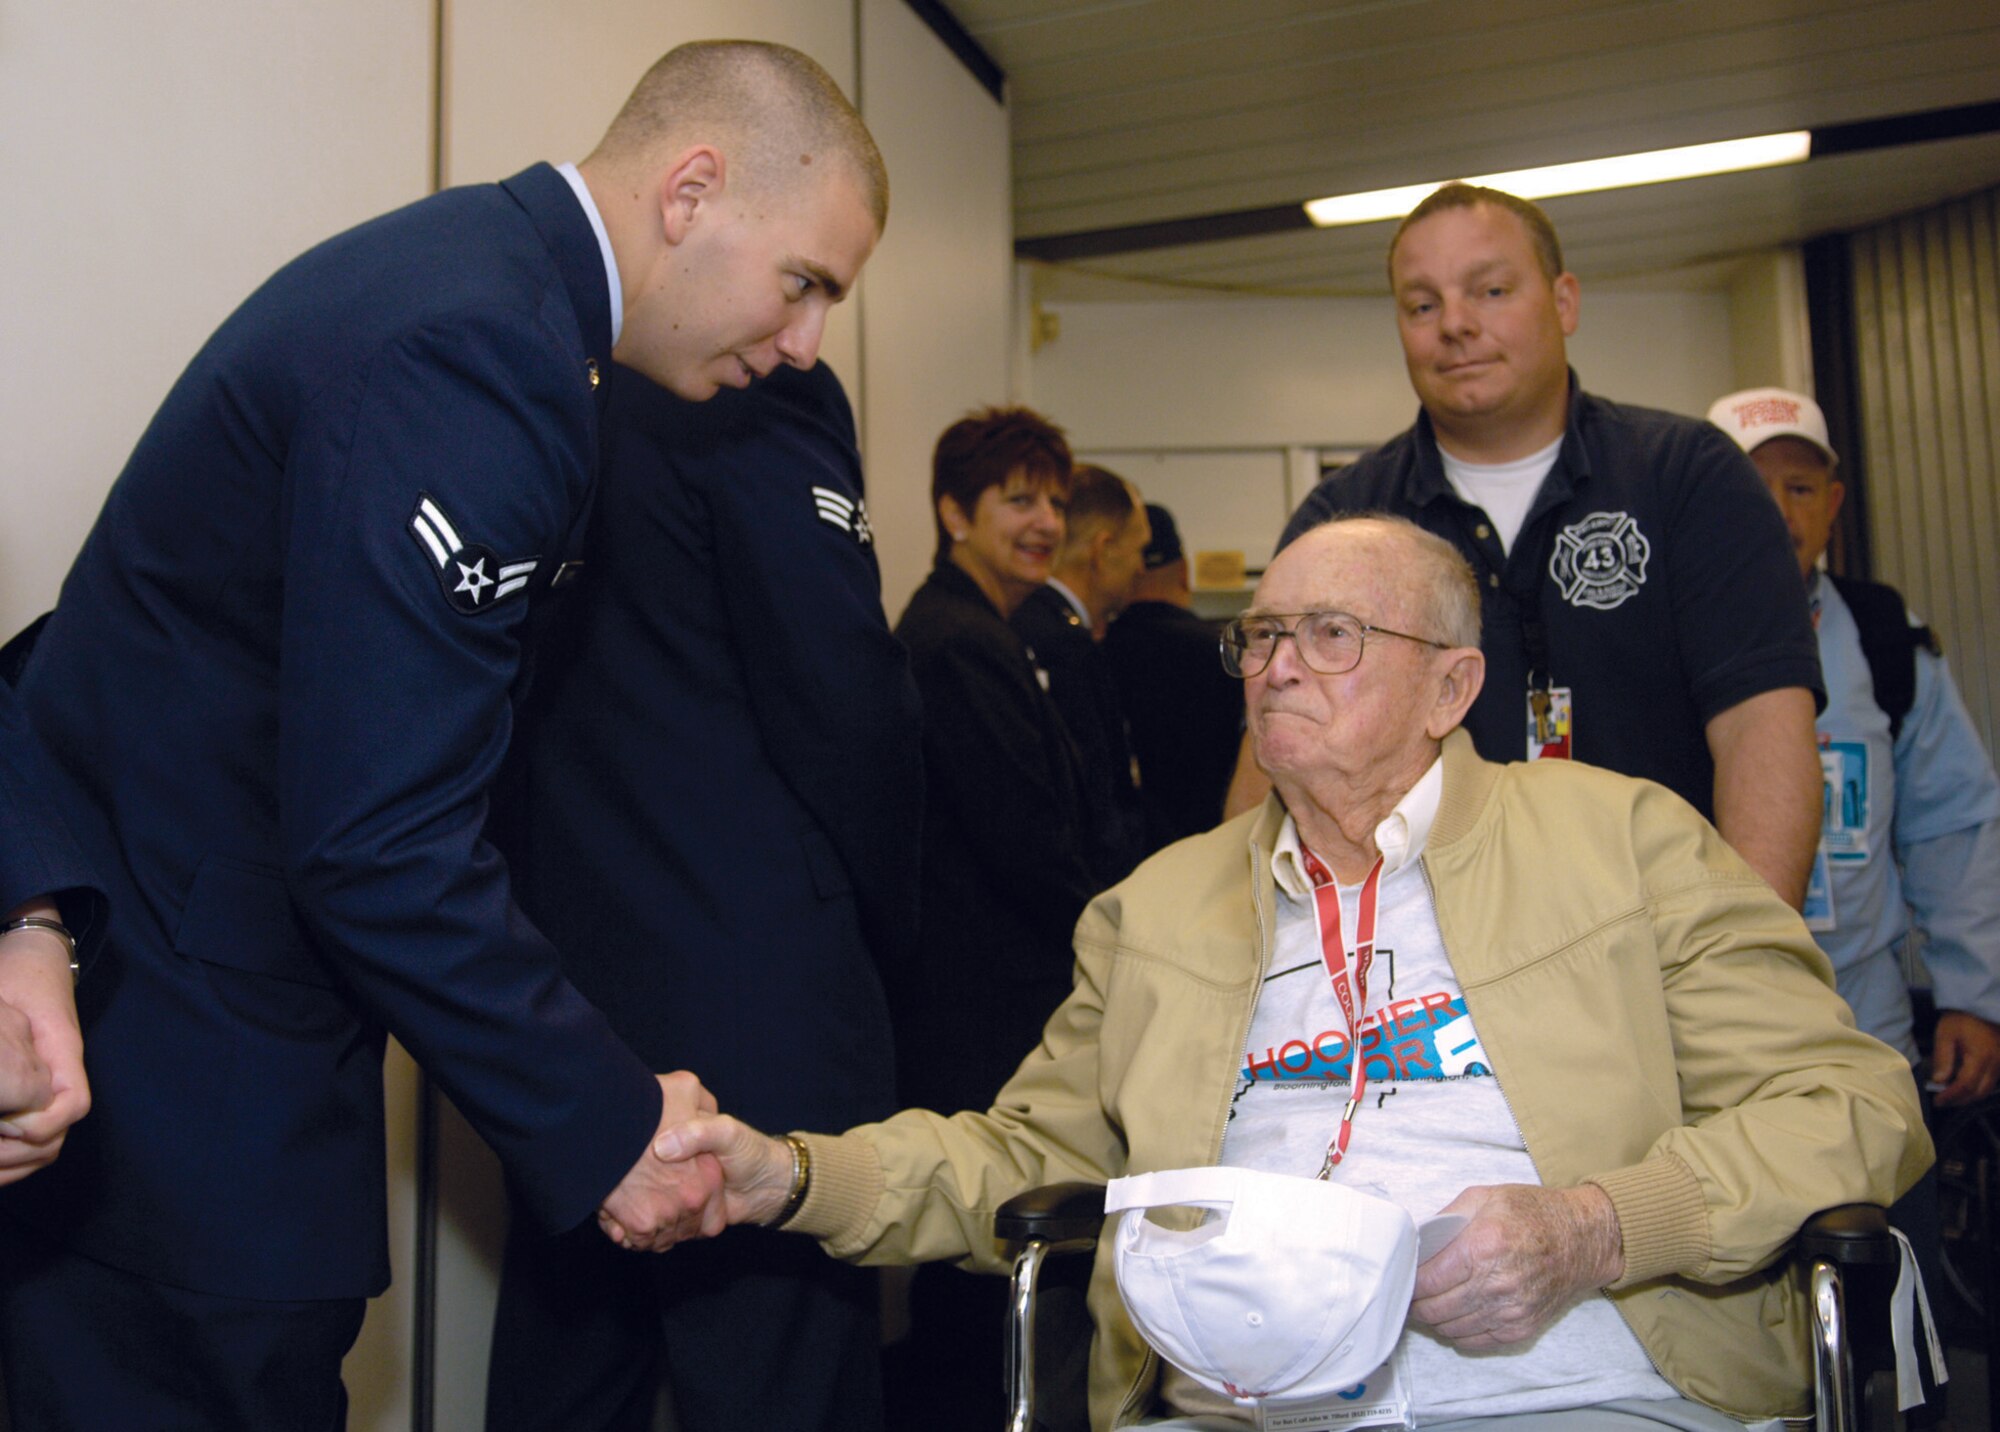 Airman 1st Class Thomas Parks, 779th Medical Operations Squadron aerospace medicine technician, greets Robert Jones, a World War II veteran, as he departs an aircraft at Baltimore Washington International Airport April 22. Several Andrews members welcomed and thanked arriving members of the Honor Flight program on the first leg of their D.C. tour. (U.S. Air Force photo/ Senior Airman Renae Kleckner)